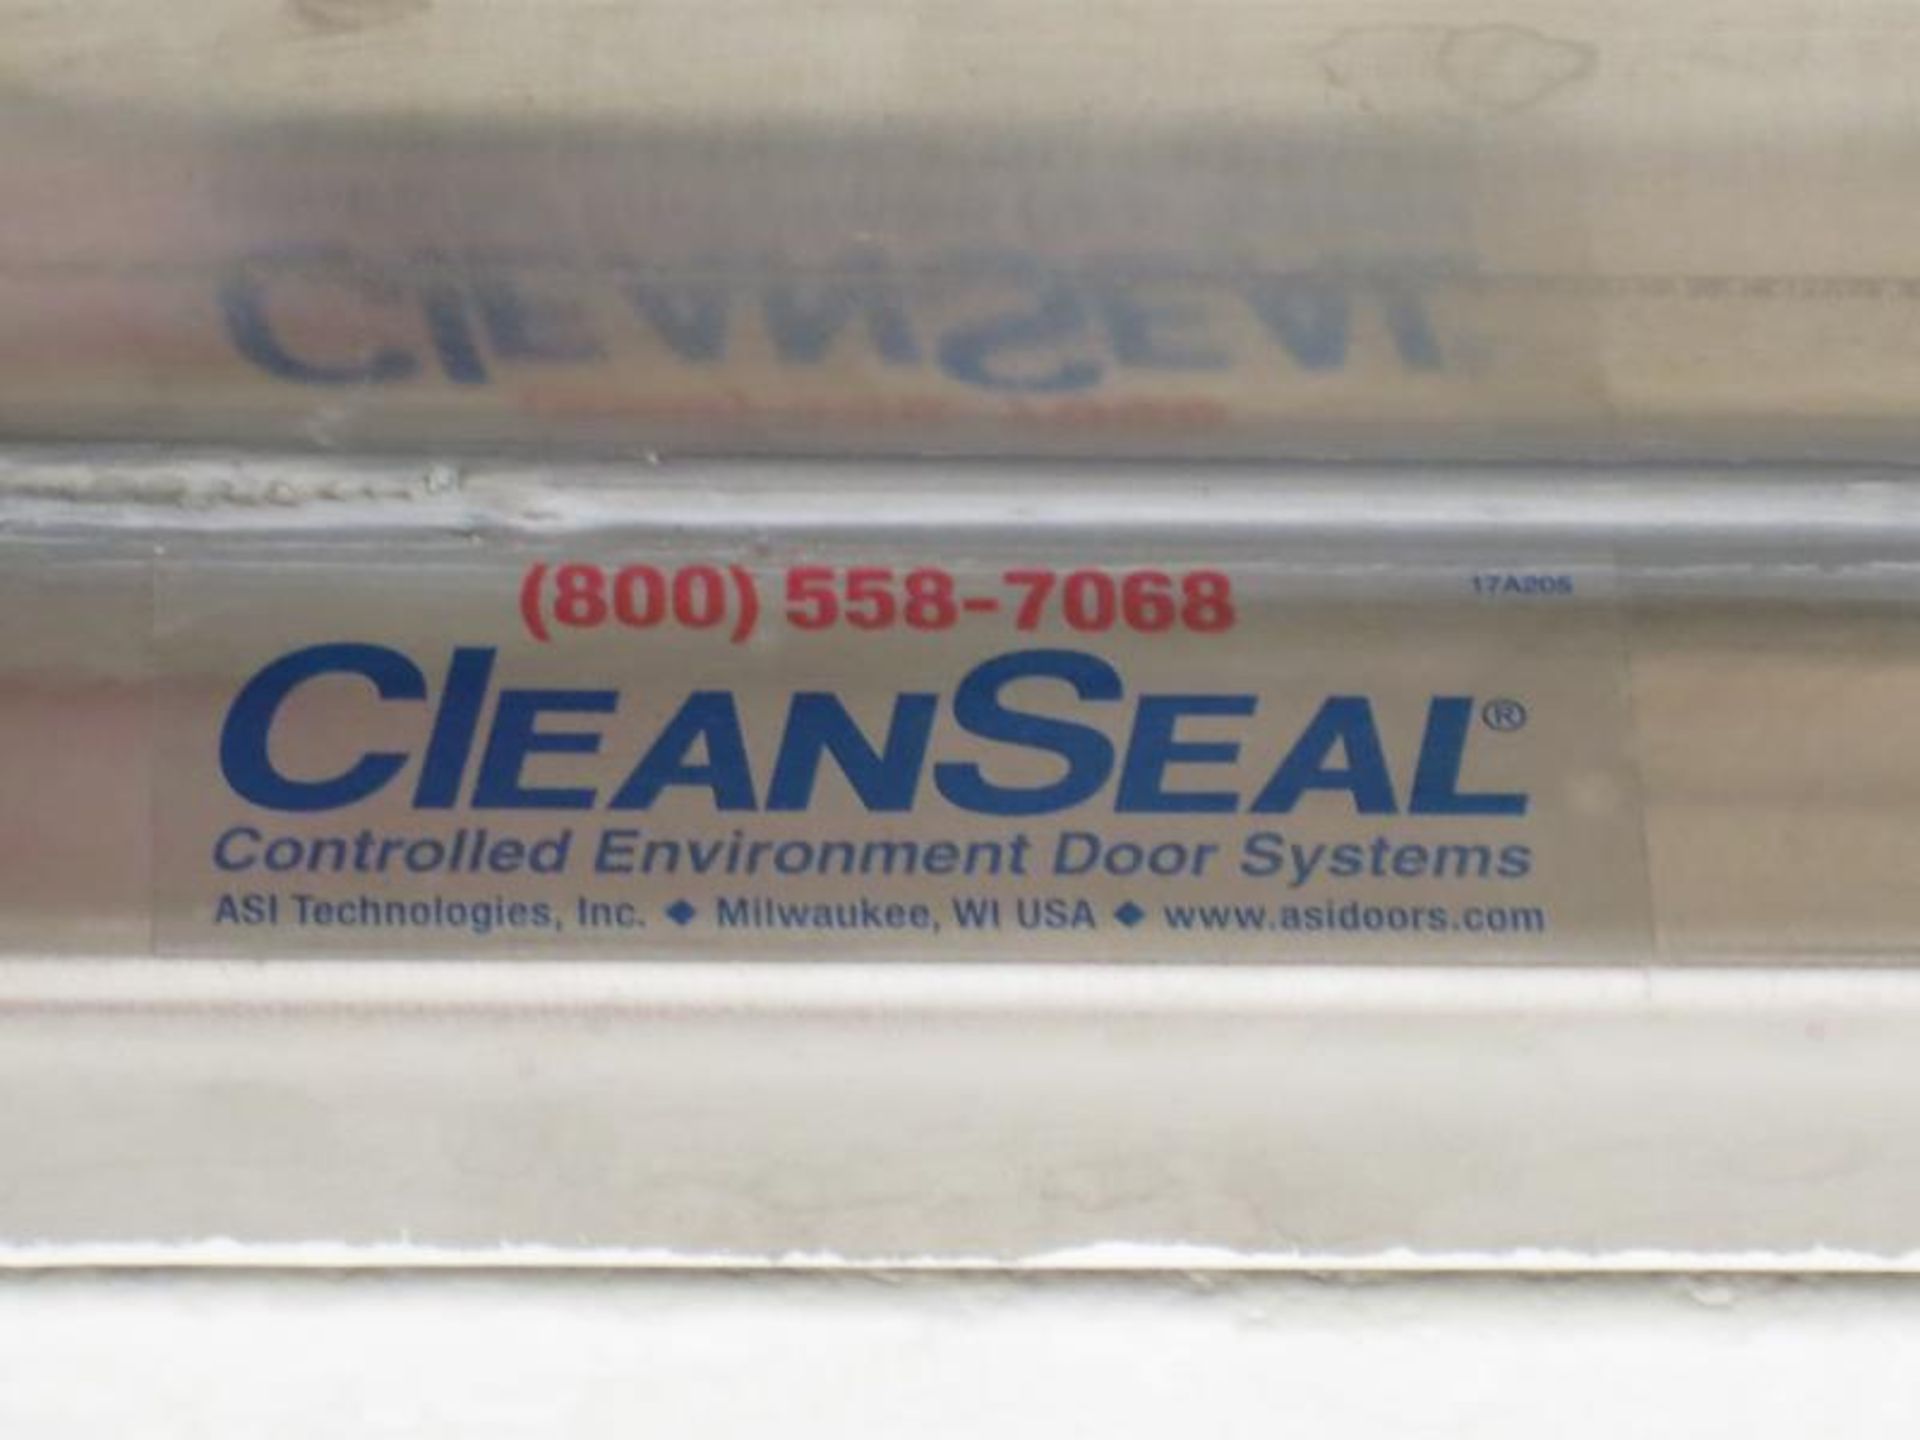 Cleanseal Automatic Double Sliding Door; 92"w x 99" h. Controlled Environment Doors. HIT# 2226007. - Image 3 of 3